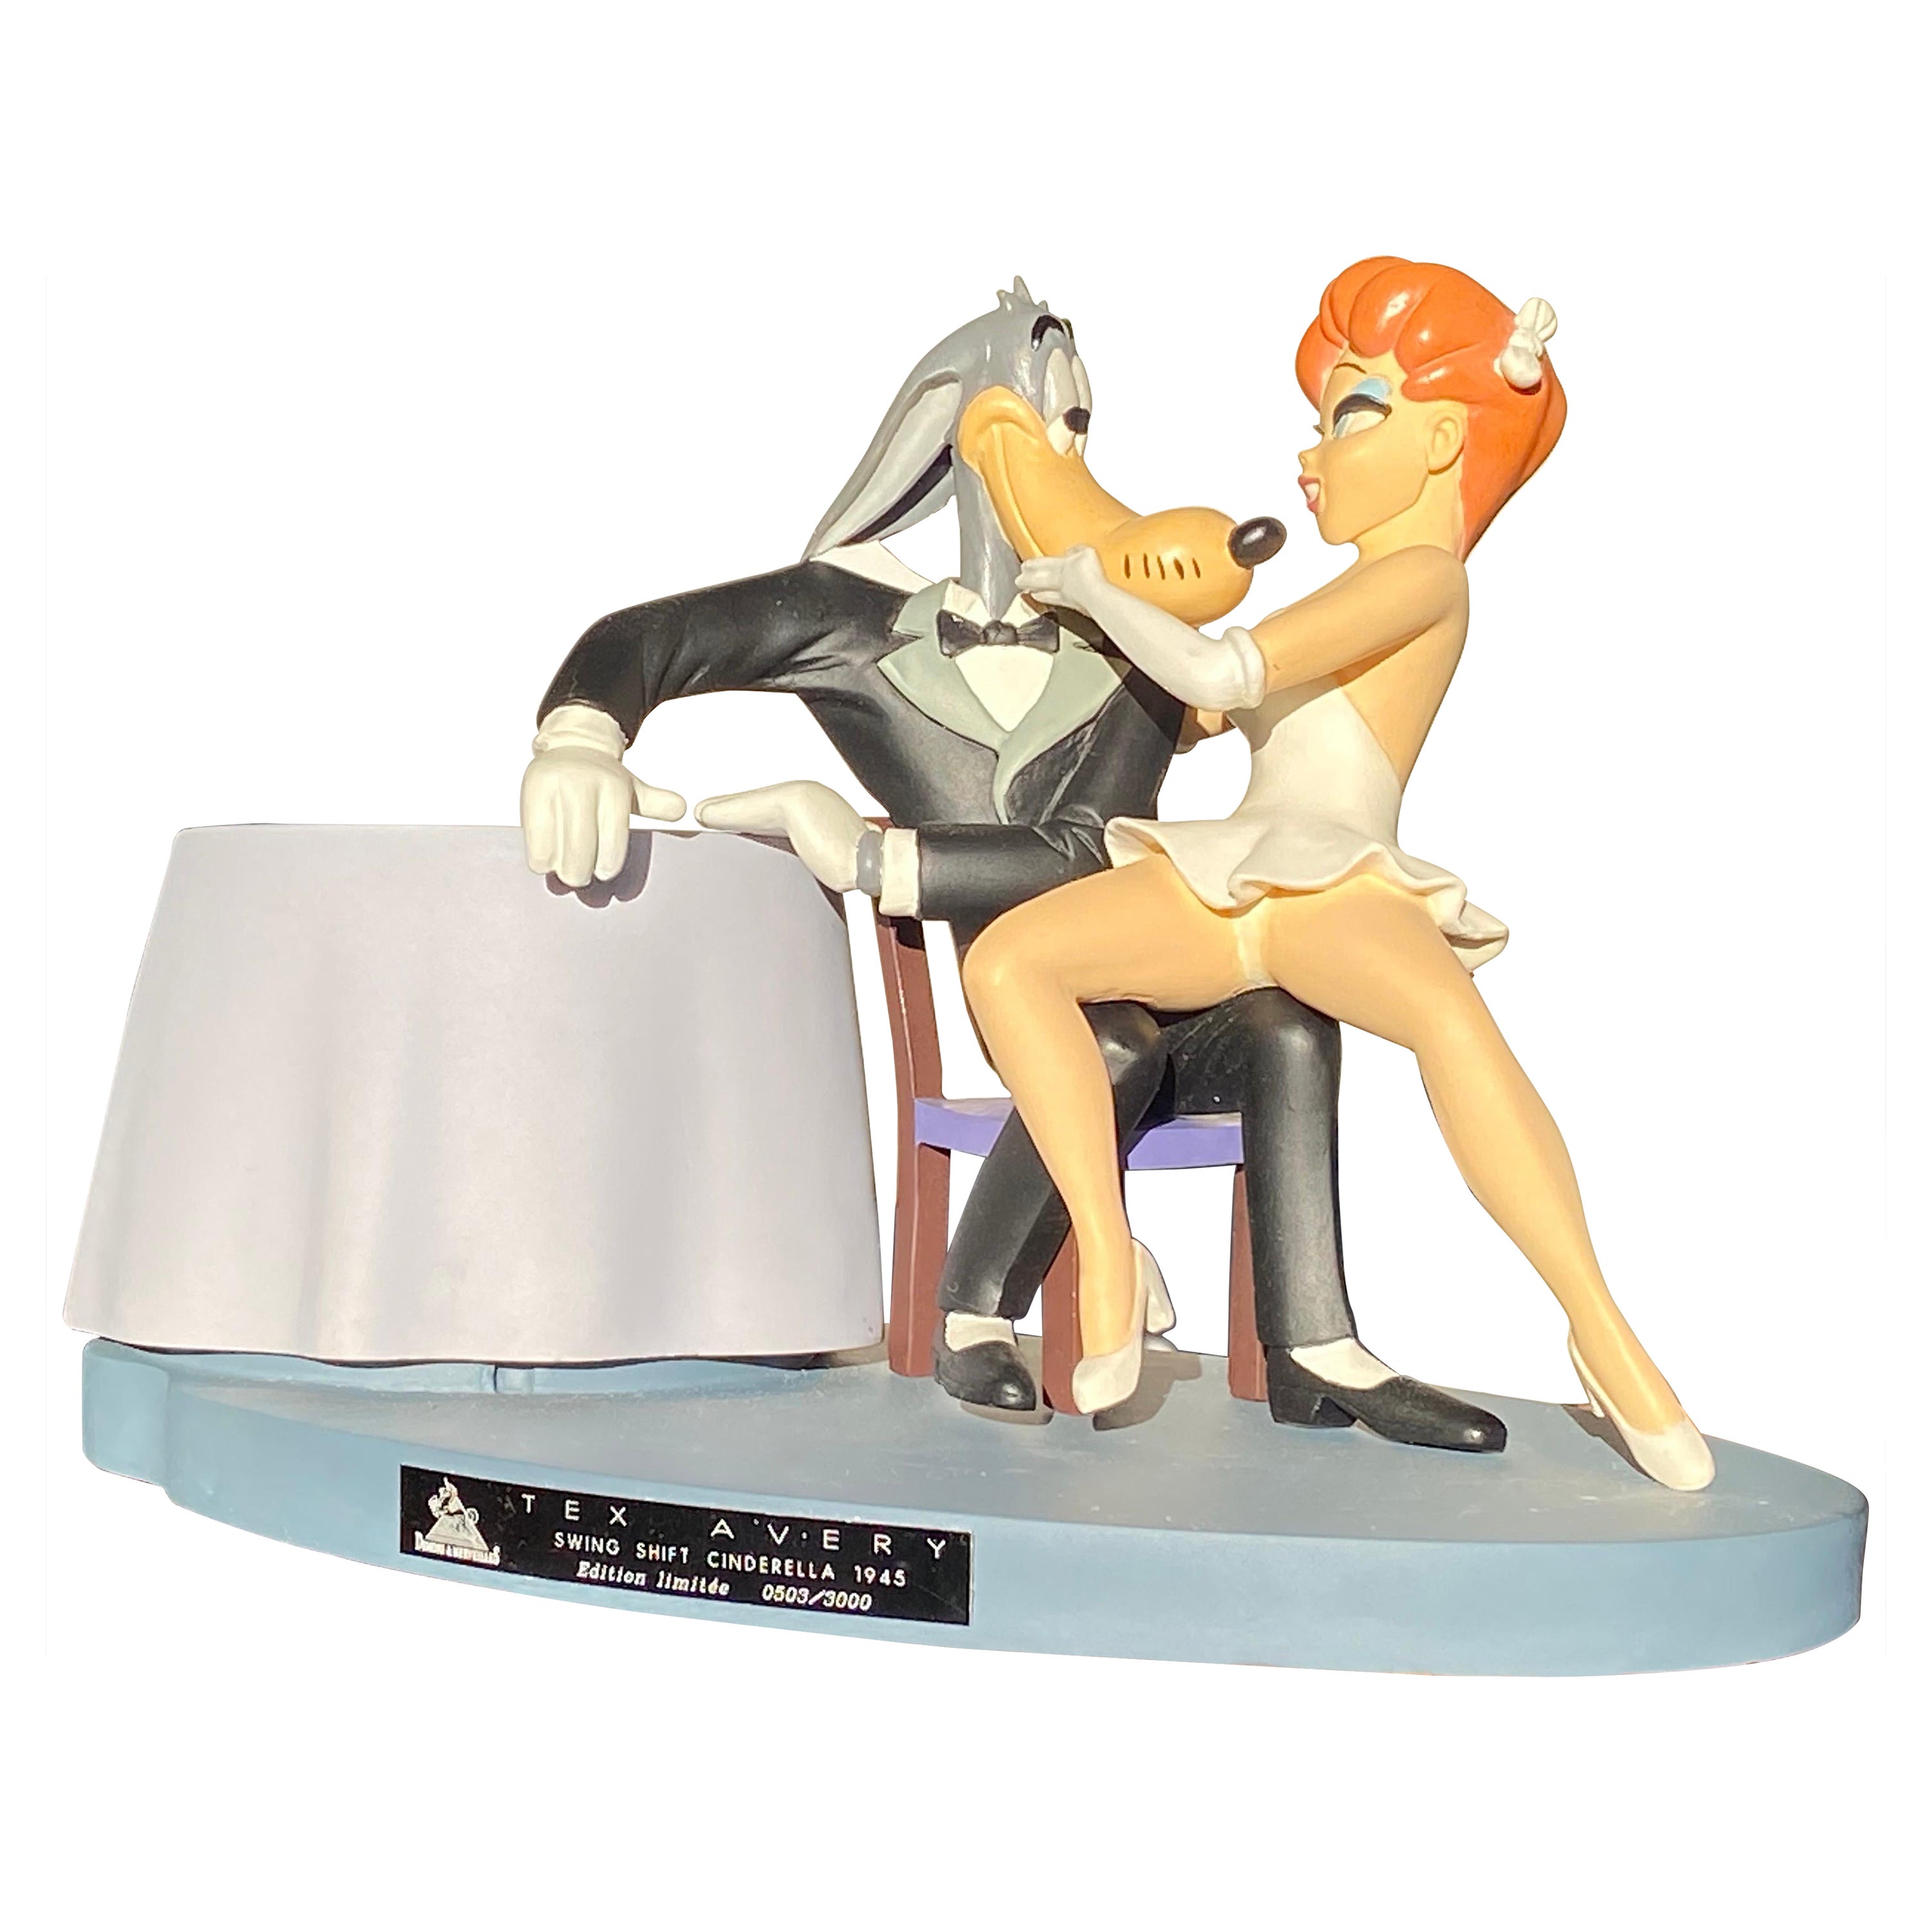 Rare and Collectable TexAvery Figurine Statue by Demons & Merveilles For Sale